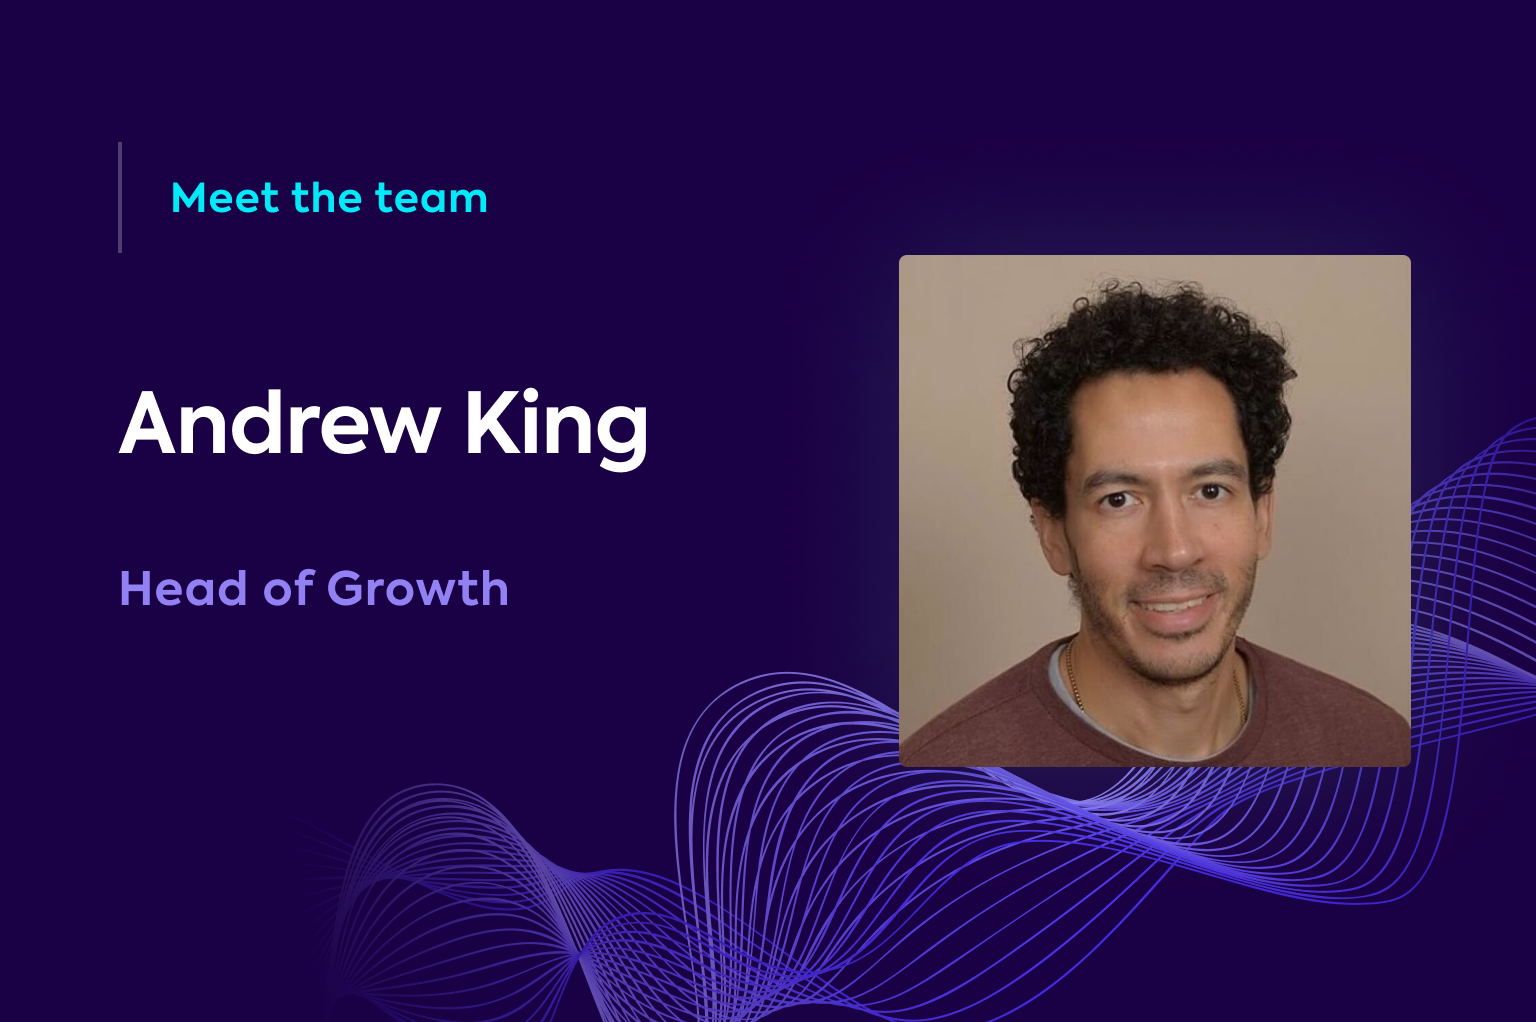 Sit down with Andrew King, Head of Growth